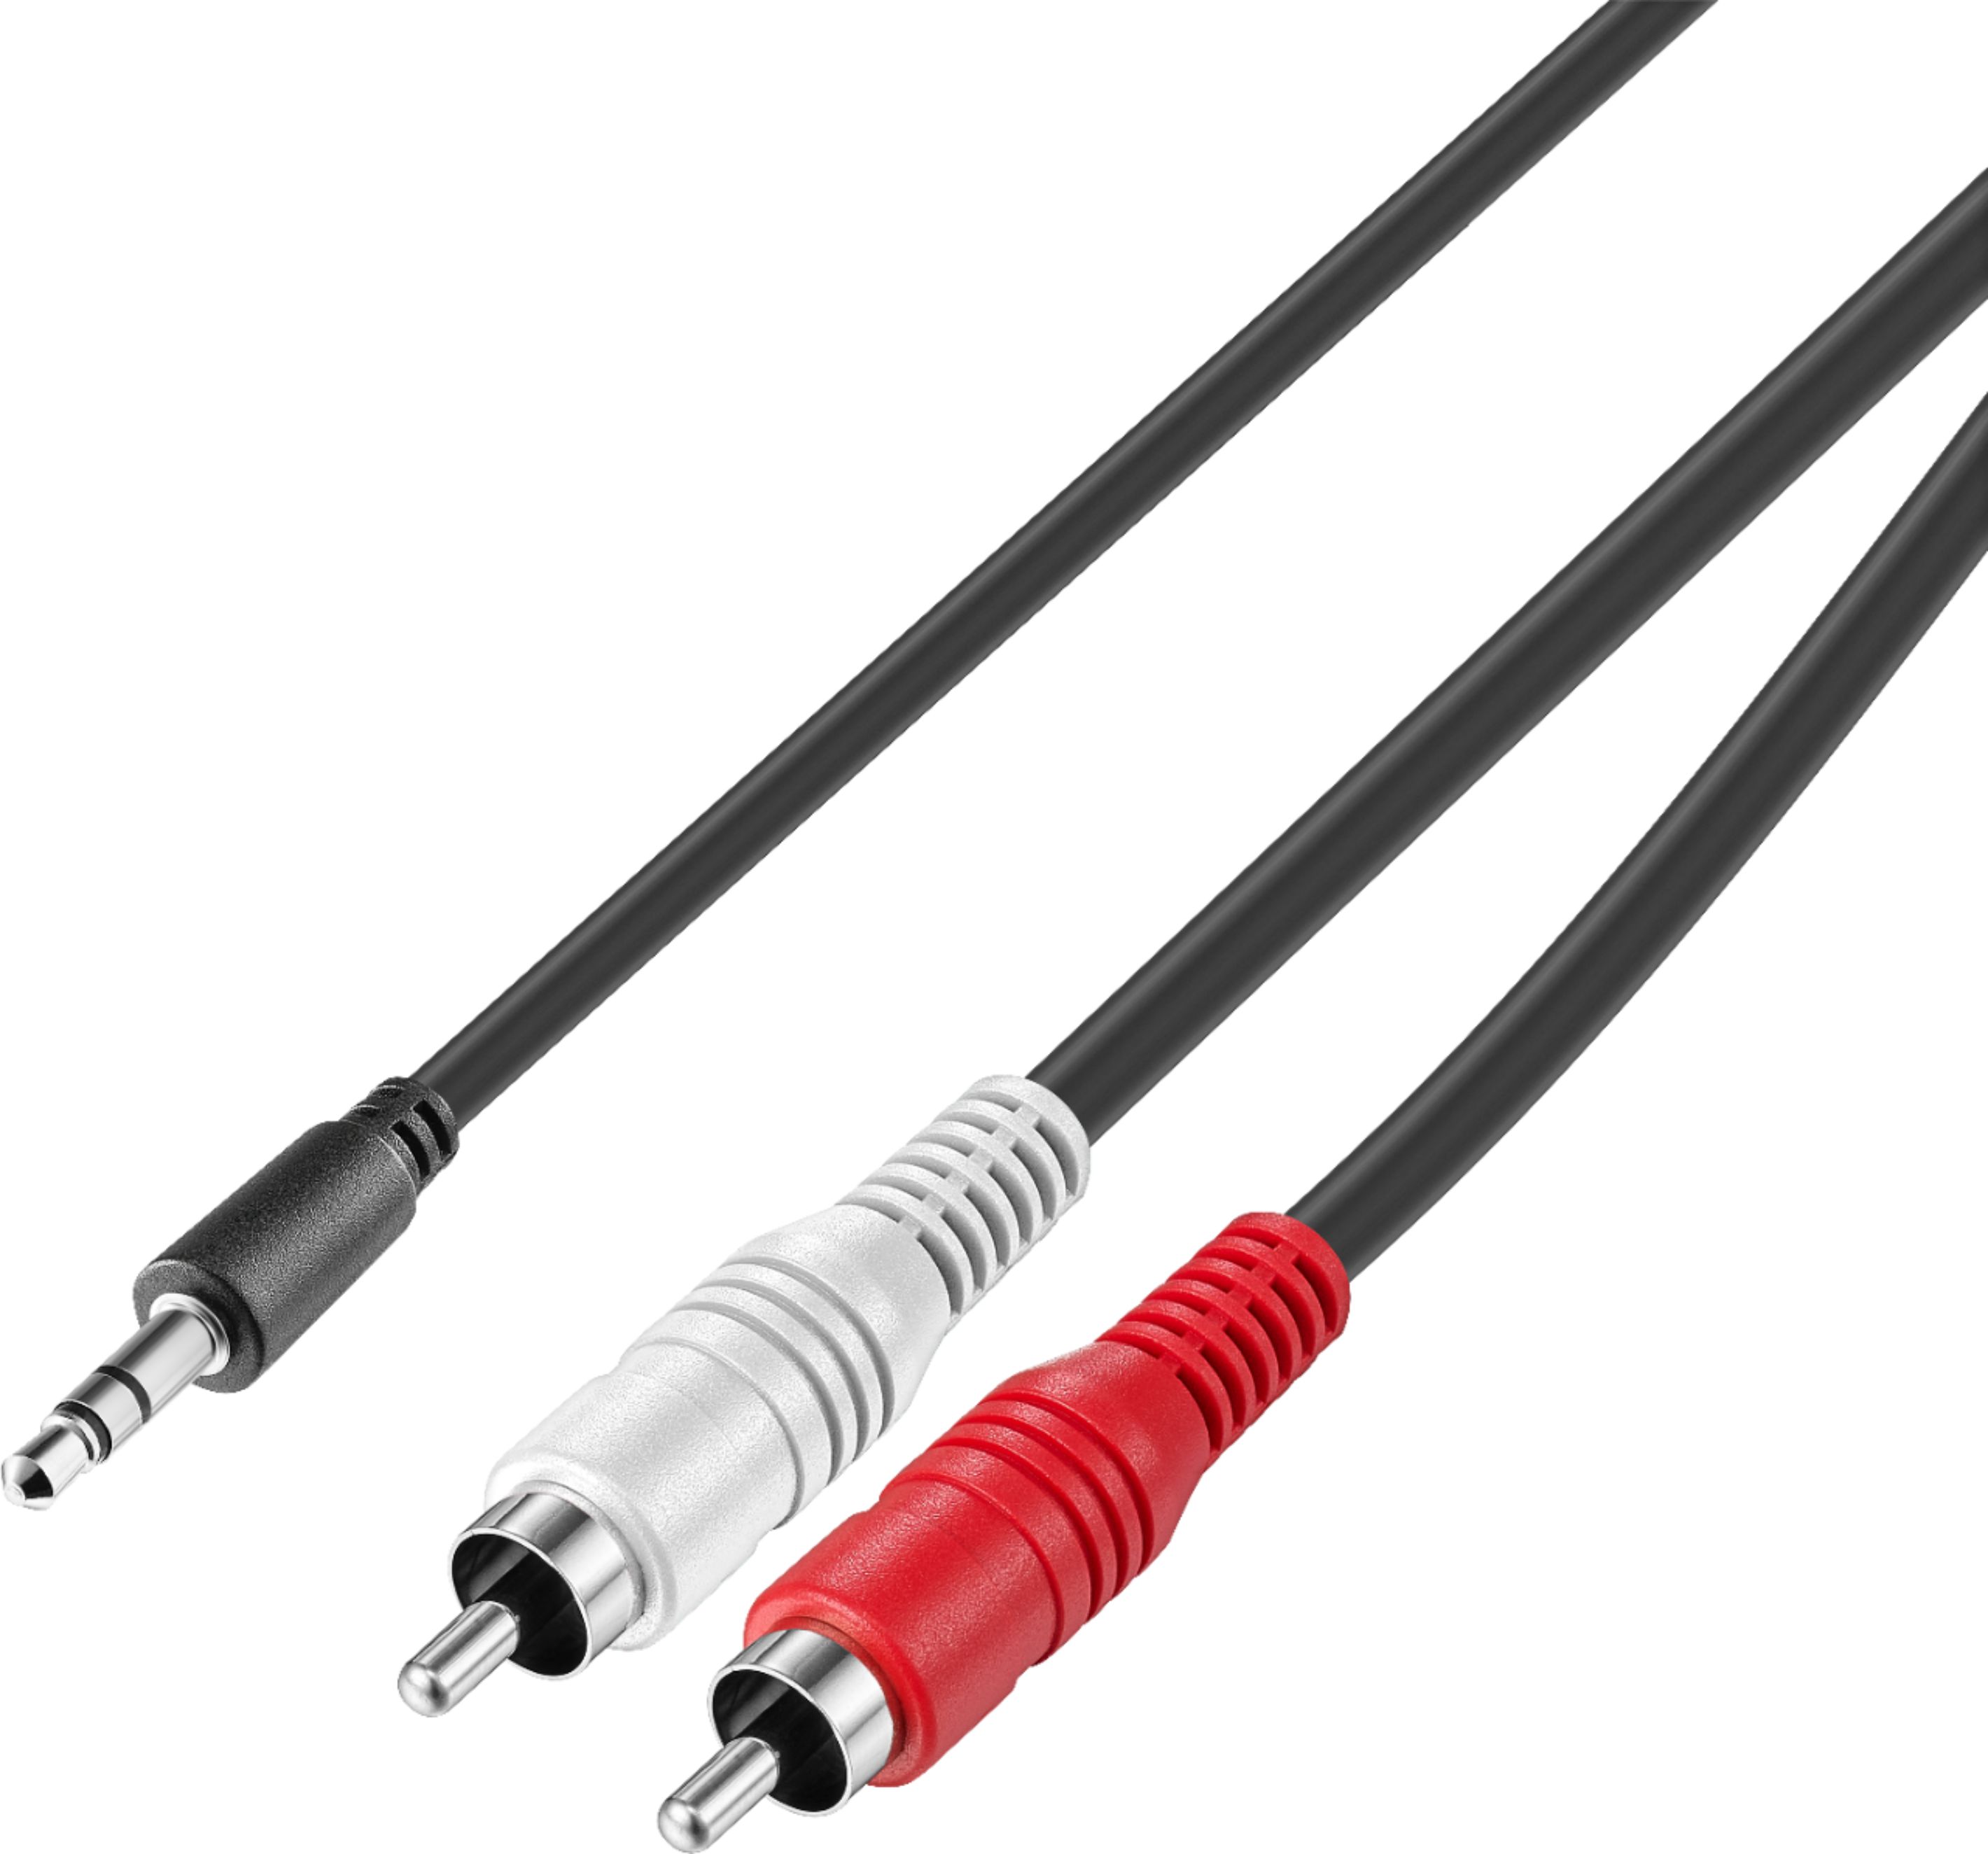 3.5mm to rca audio cables - Best Buy